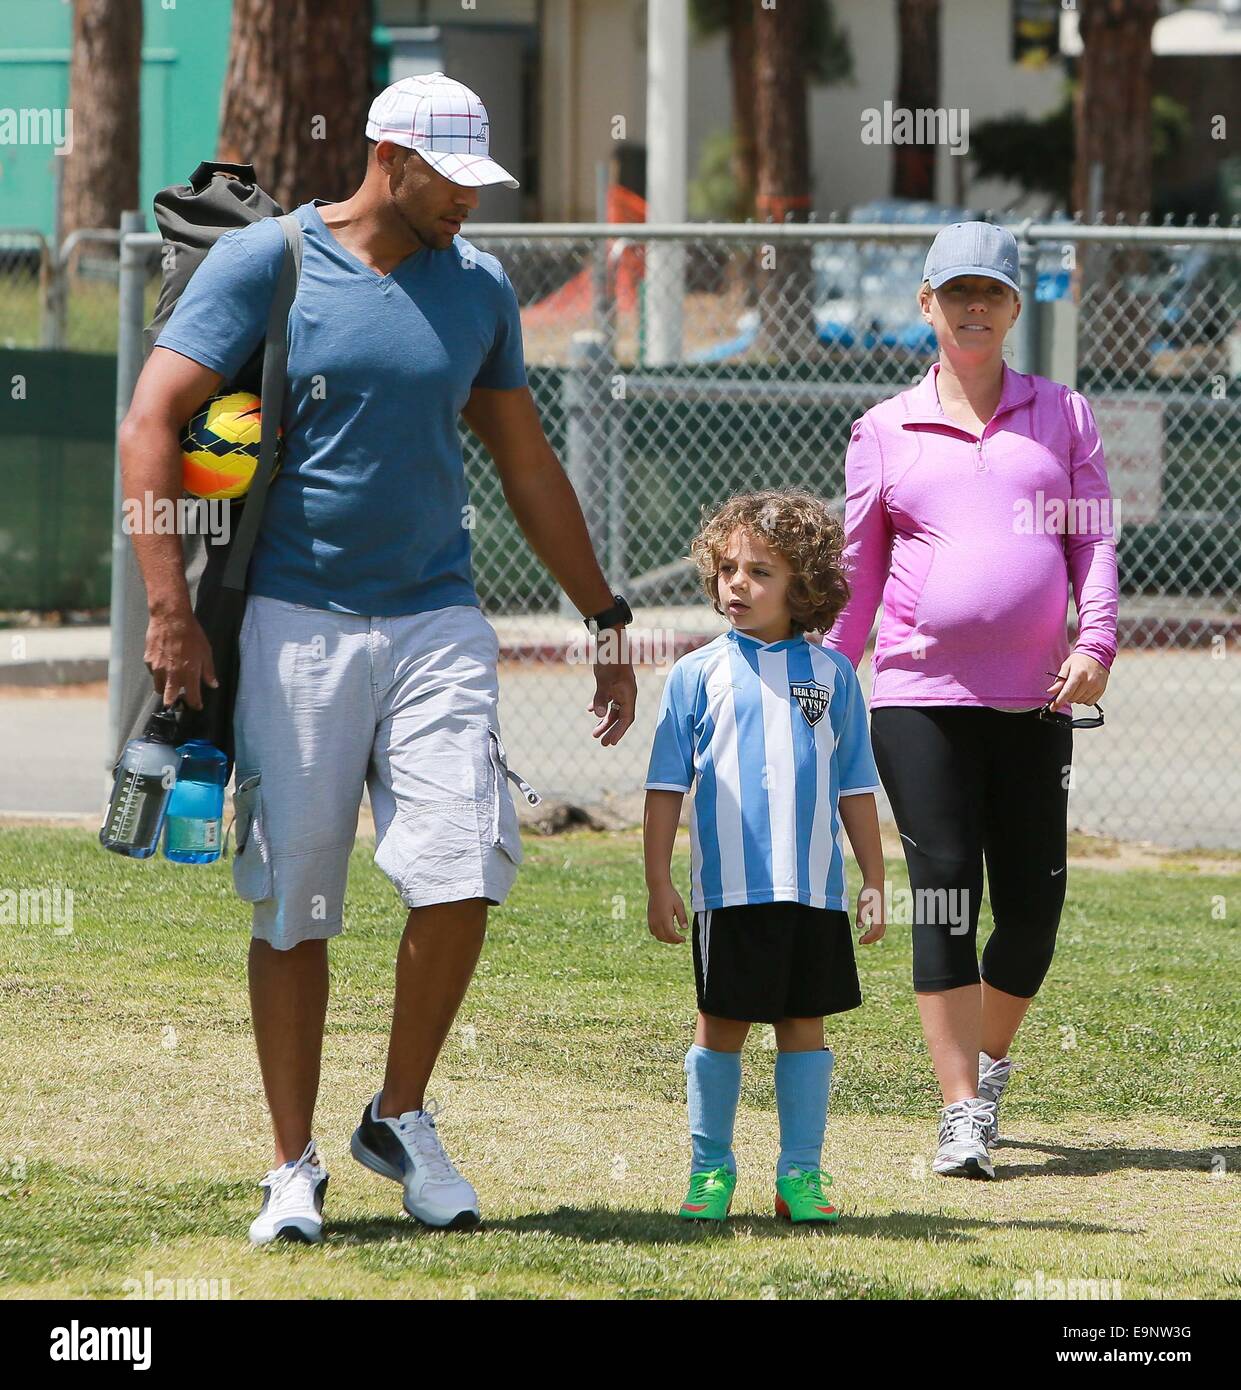 A heavily pregnant Kendra Wilkinson and husband Hank Baskett take their  son, Hank Baskett IV to his football game Featuring: Kendra Wilkinson,Hank  Baskett,Hank Baskett IV Where: Los Angeles, California, United States When: